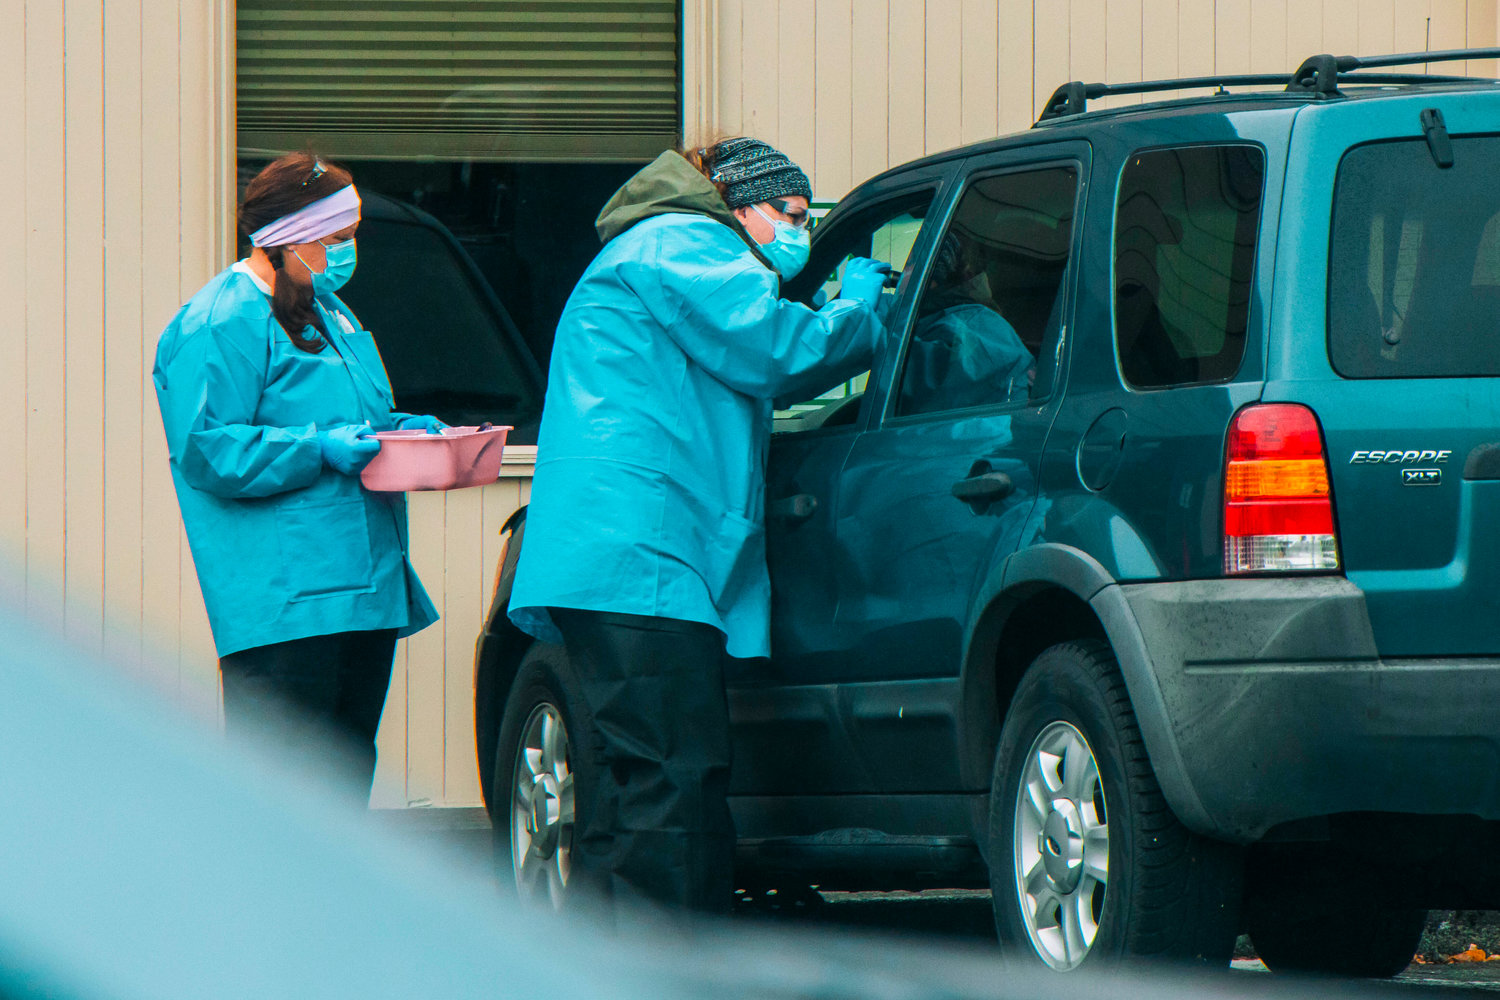 FILE PHOTO — Medical personnel at Valley View Health Center examine a patient at a drive-up COVID-19 testing site.